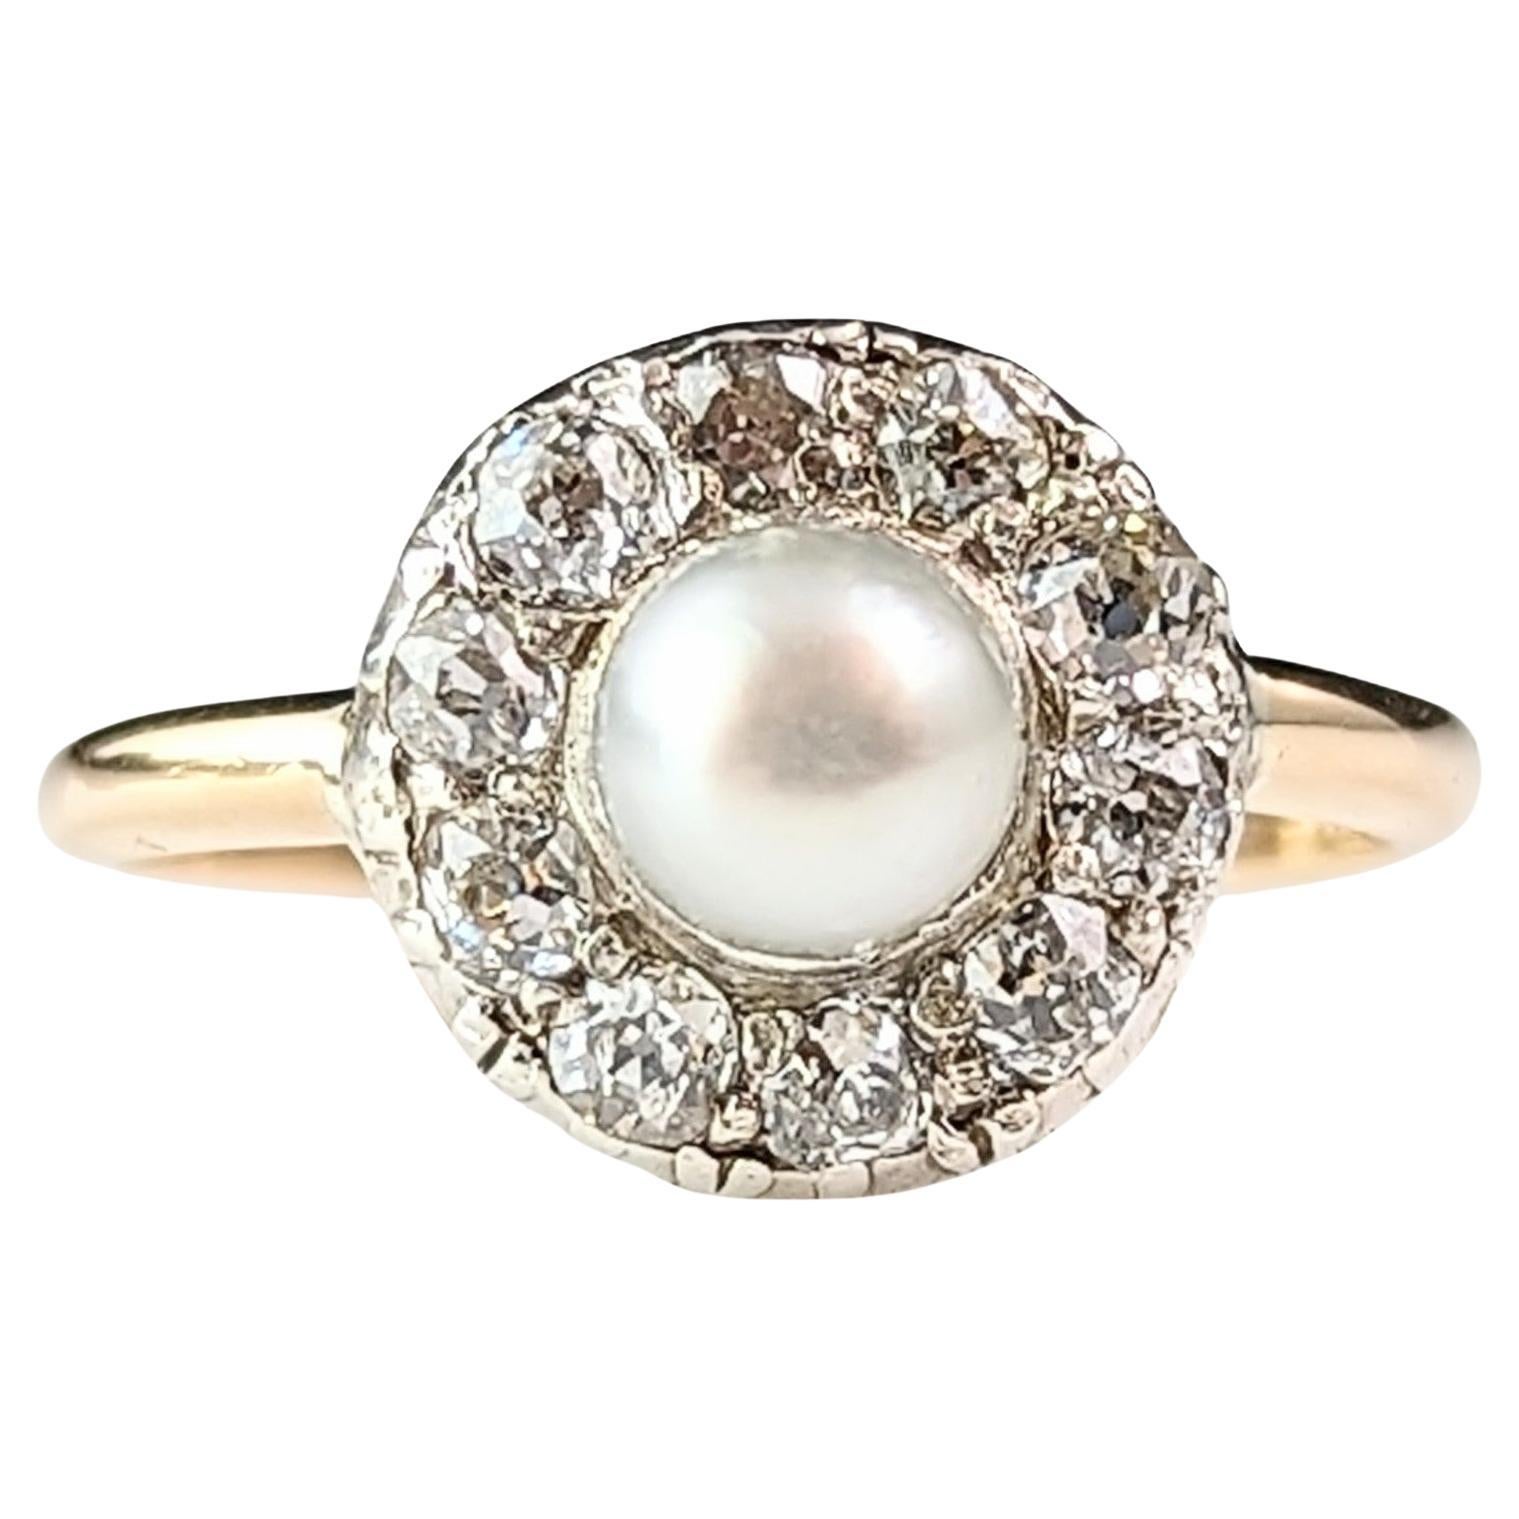 Antique Old cut Diamond and Pearl halo ring, 18k gold 